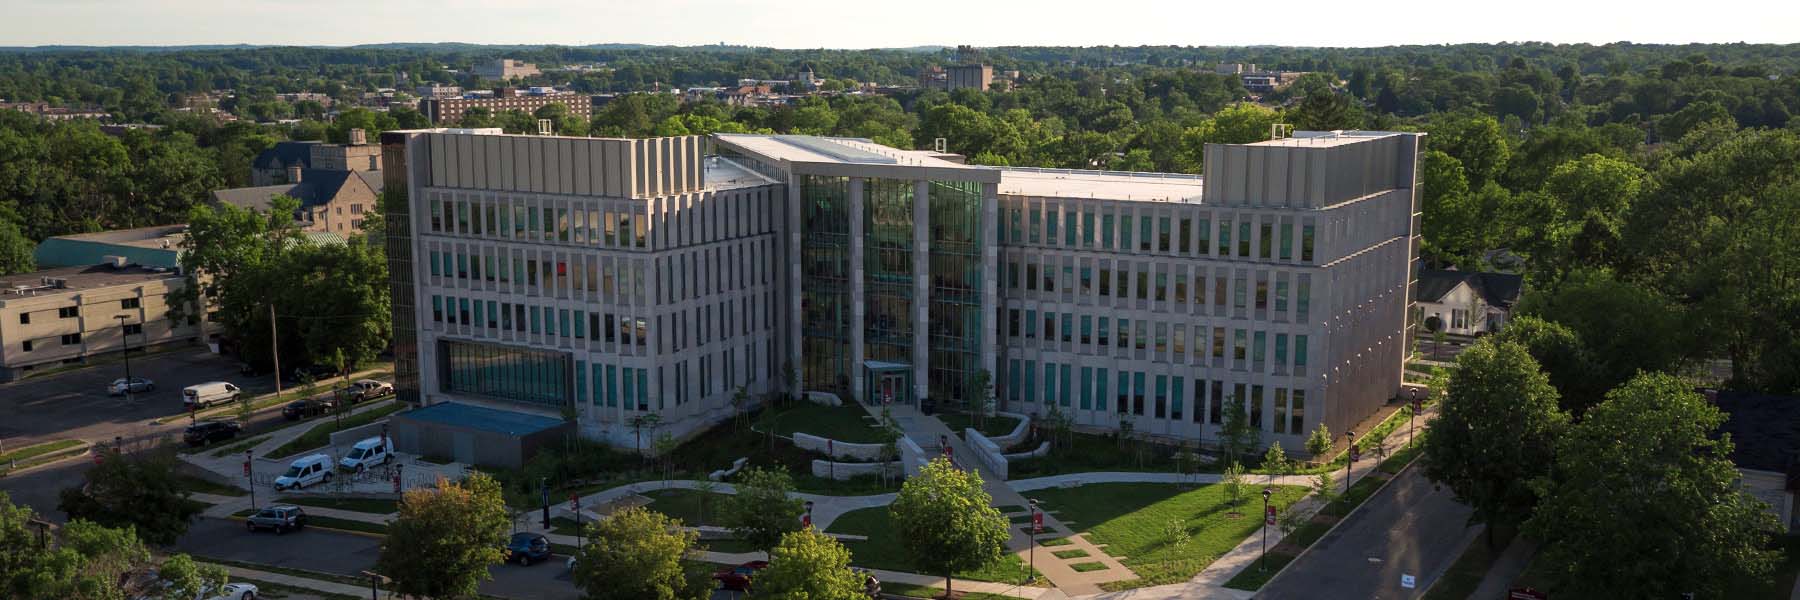 An aerial view of the exterior of the Luddy Hall academic building